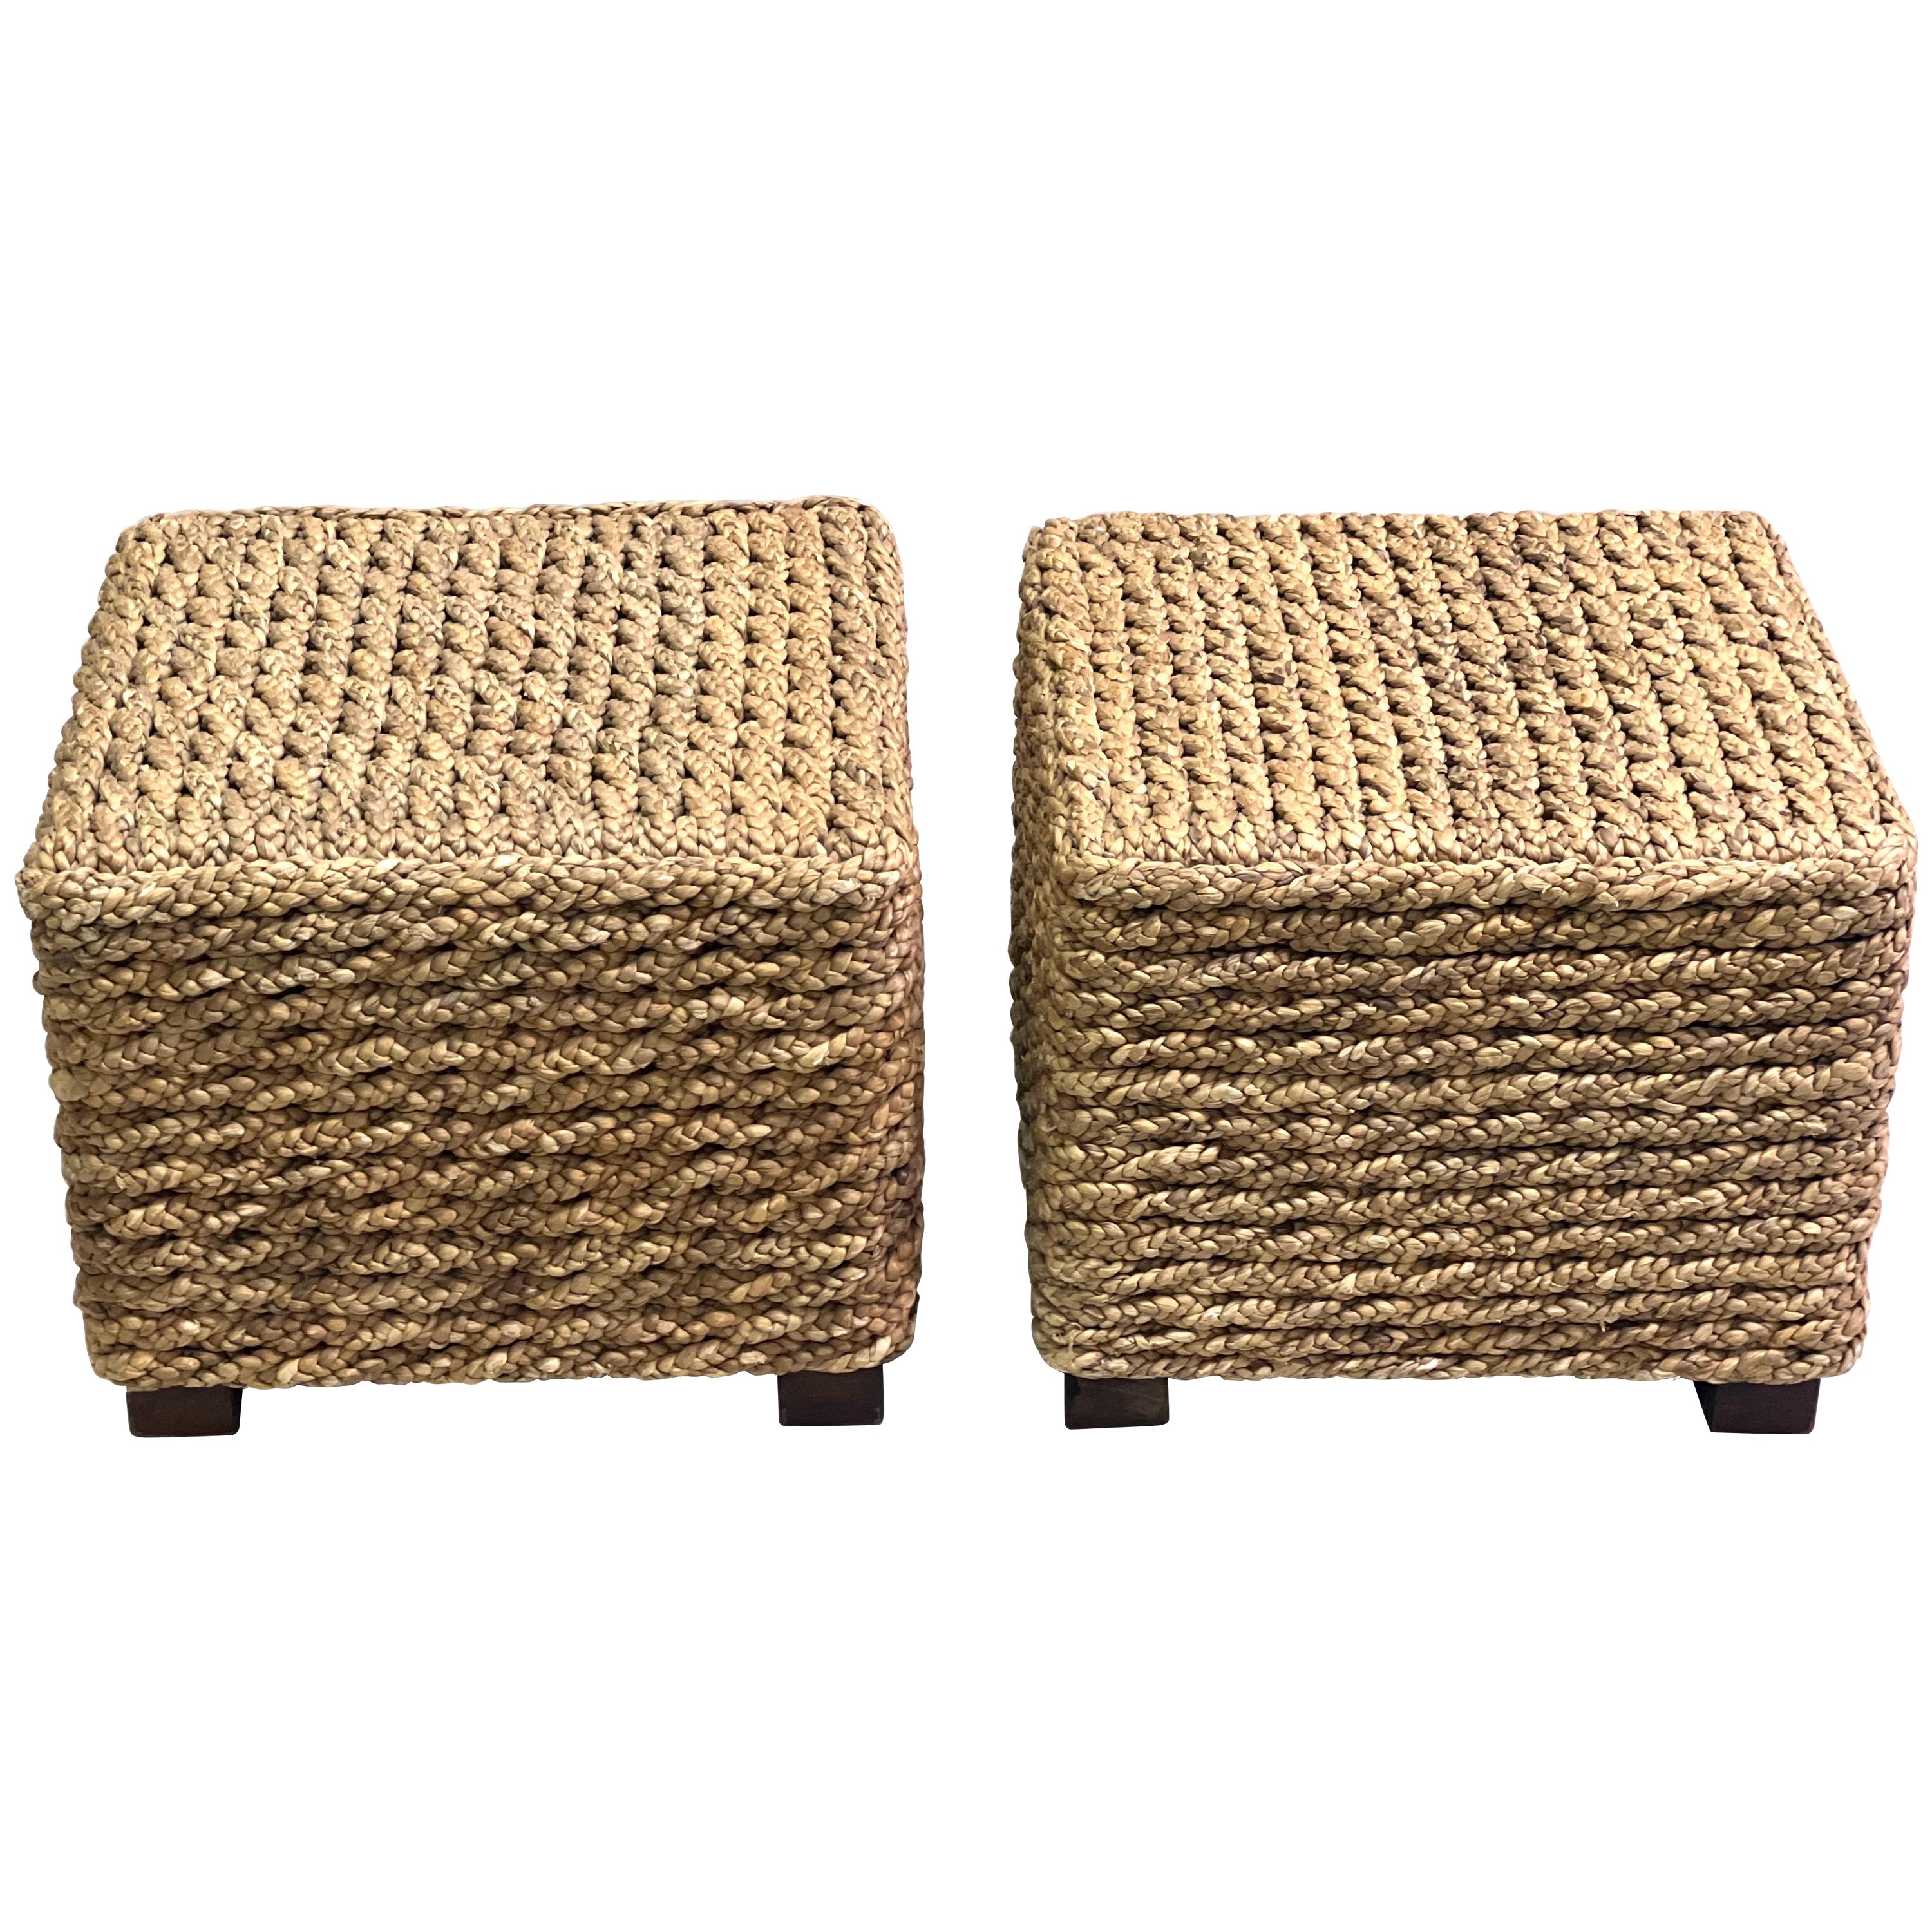 Pair of French Mid-Century Rope Stools / Benches by Adrien Audoux & Frida Minet